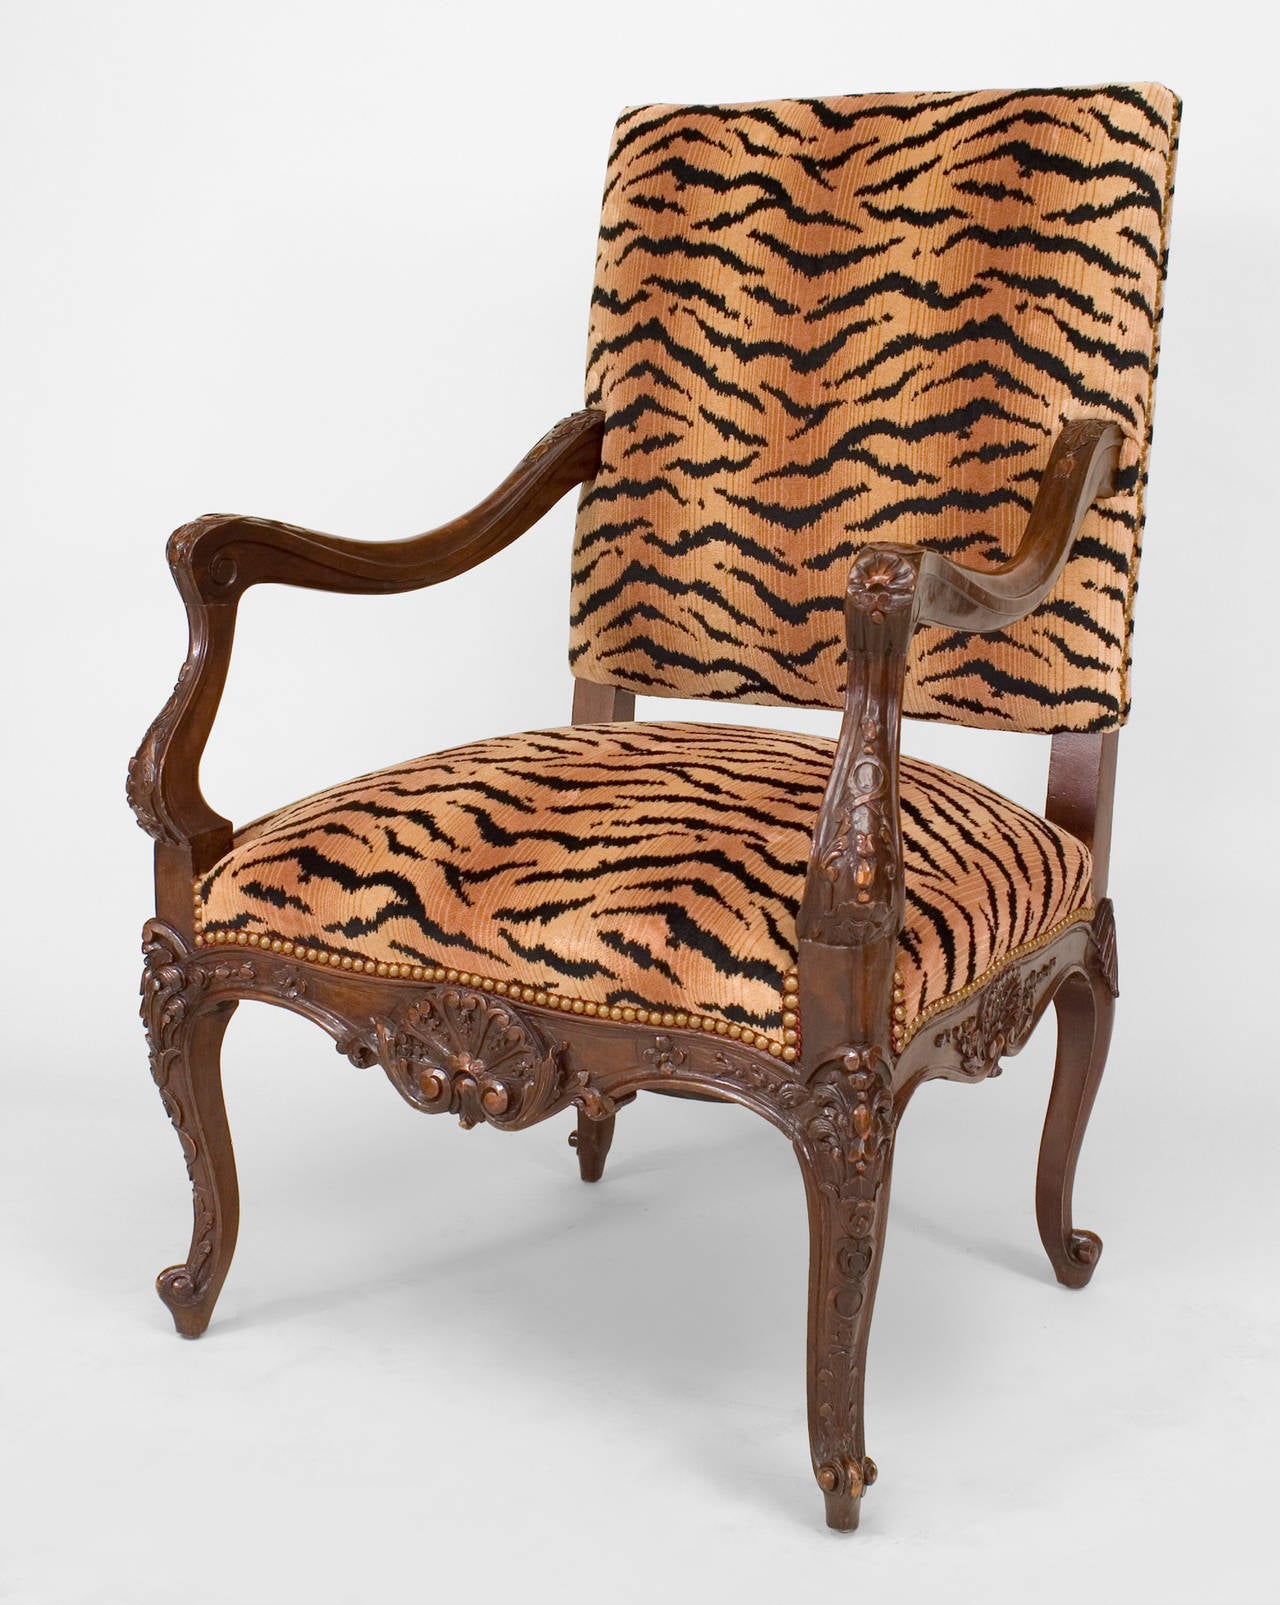 French Regence style (19th/20th C) carved walnut open arm chair with faux tiger upholstered seat and back.
